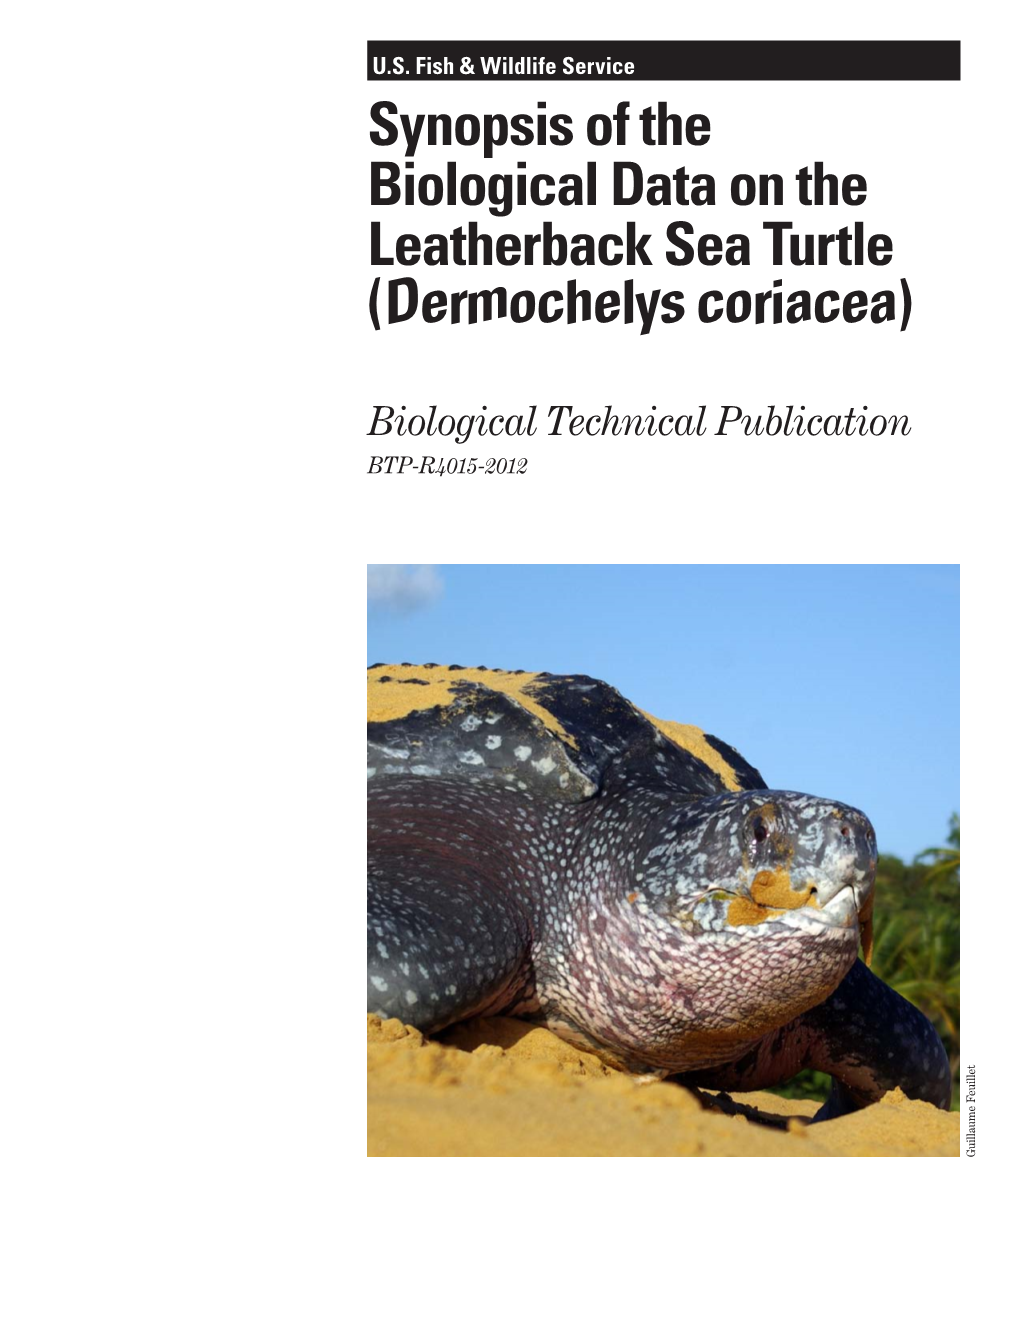 Synopsis of the Biological Data on the Leatherback Sea Turtle (Dermochelys Coriacea)